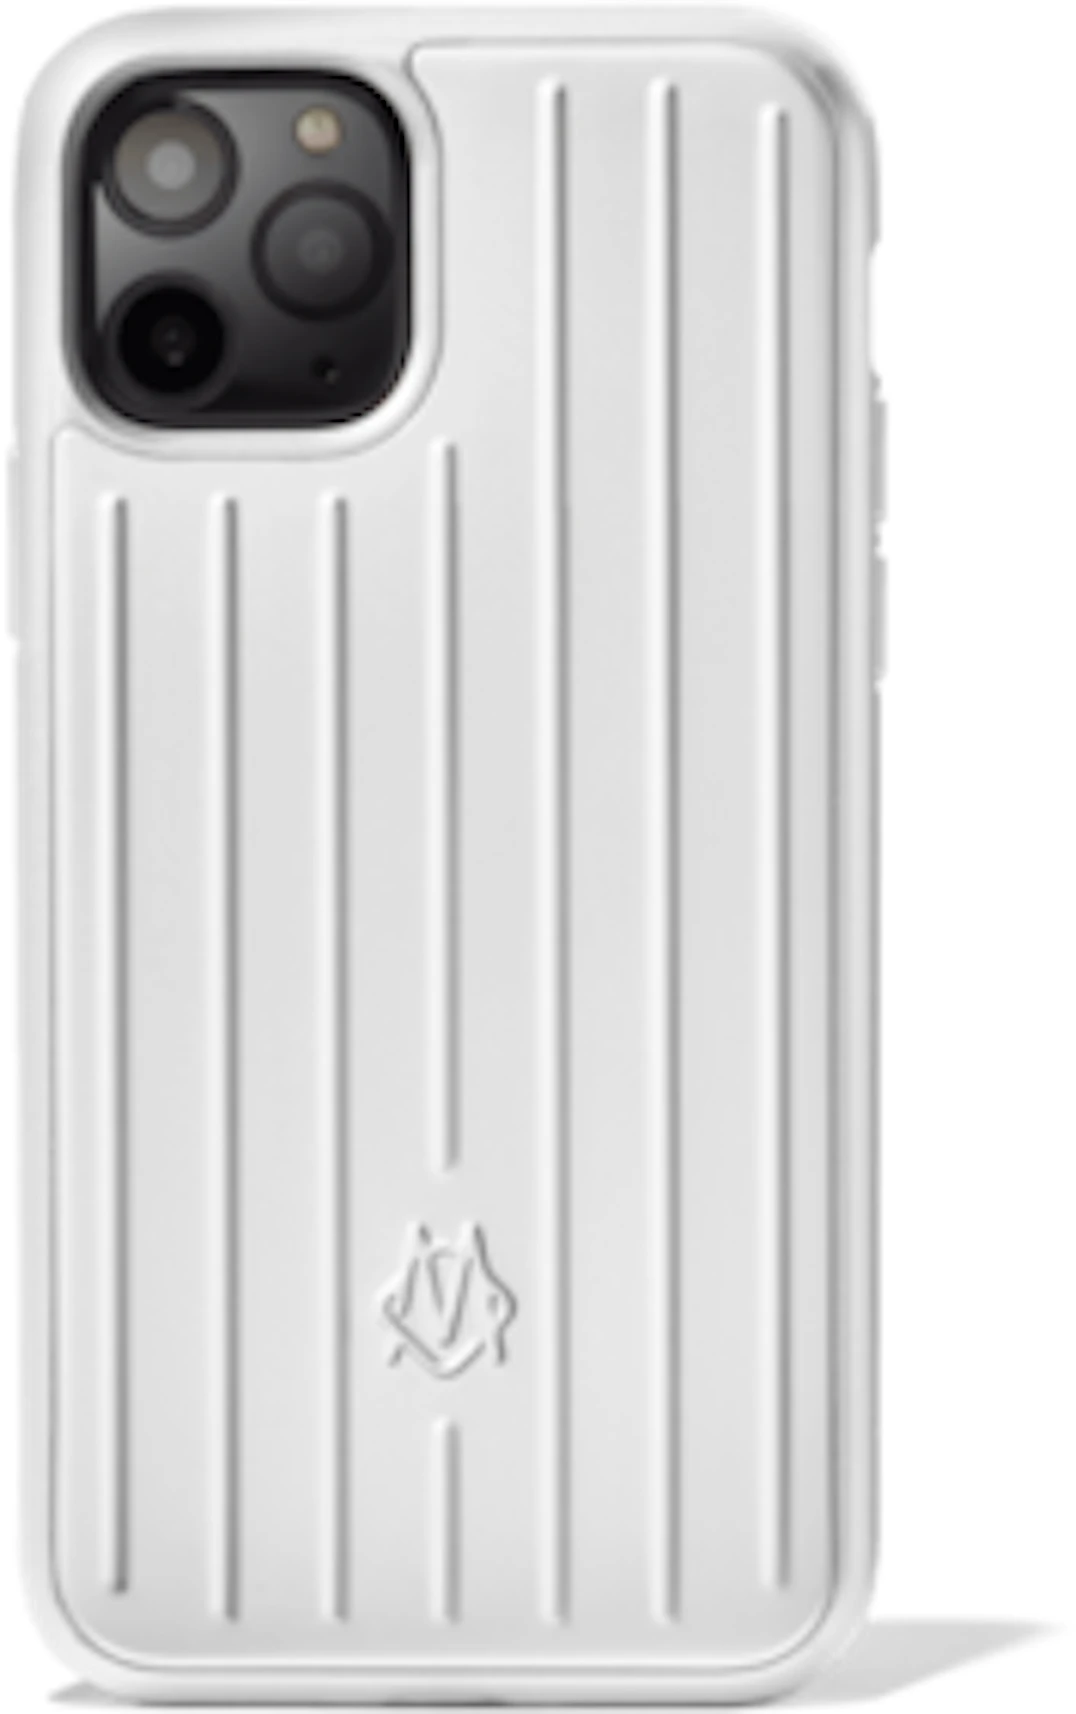 Rimowa Aluminum Groove Case for iPhone 11 Pro in Polycarbonate - US